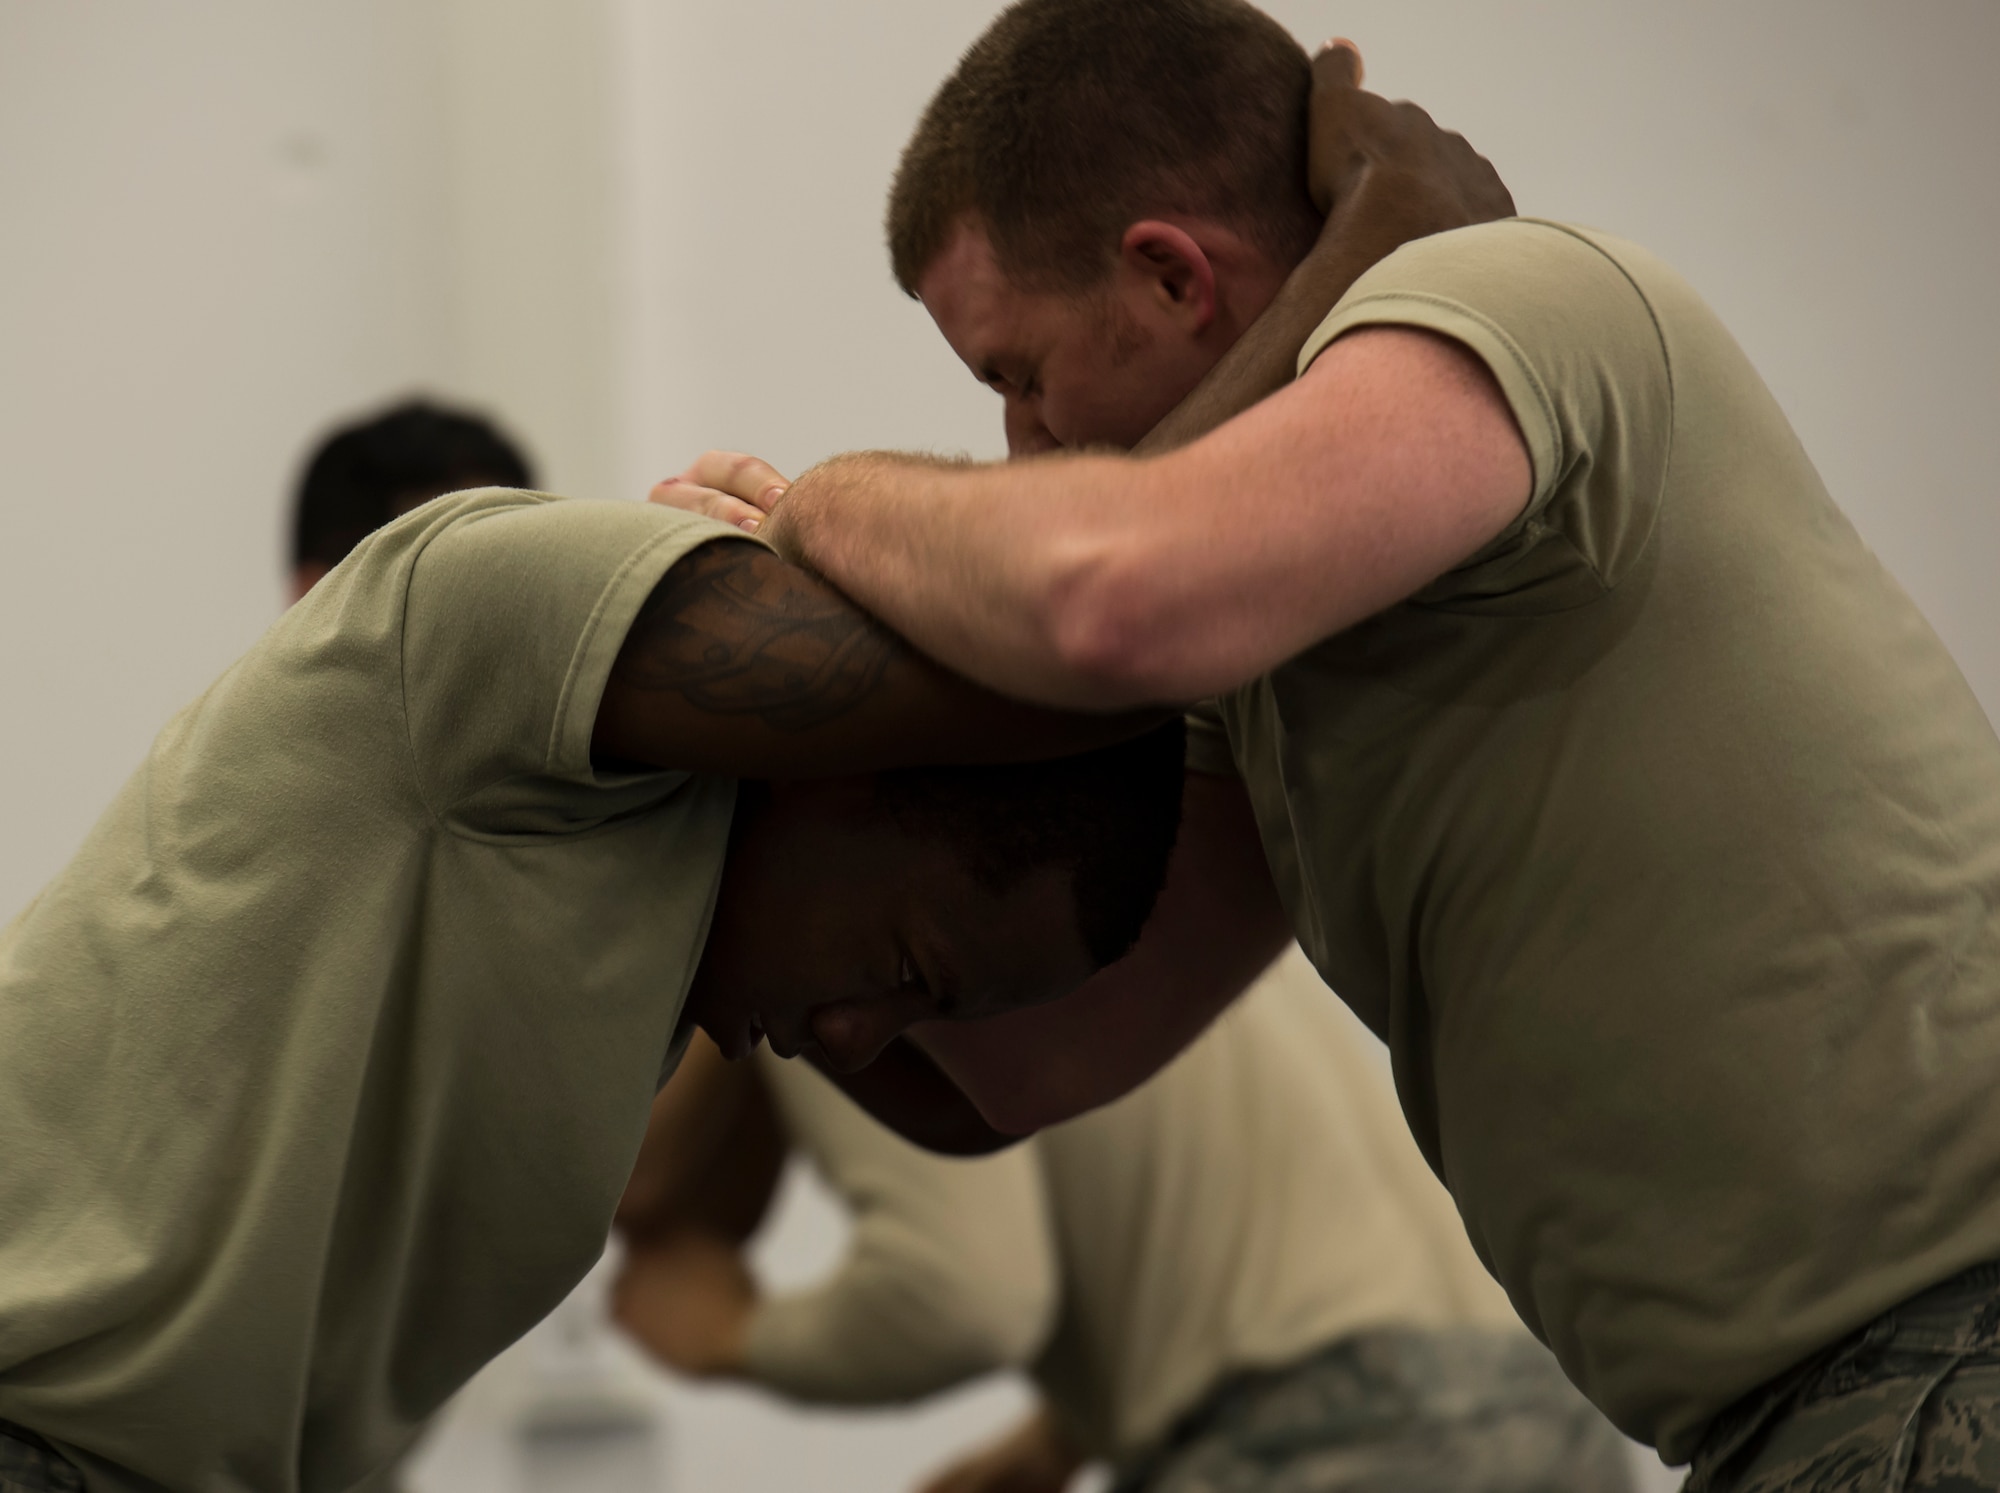 Senior Airman Michael Kurtz, 52nd Security Forces Squadron patrolman from Spangdahlem Air Base, Germany, and Airman 1st Class Nakealius Ards, 65th SFS patrolman from Lajes Field, Portugal, practice self-defense maneuvers during a Security Forces combative course Jan. 14, 2016, at Ramstein Air Base, Germany. The course is designed to help defenders gain the skills, knowledge and confidence they need in order to protect and serve. (U.S. Air Force photo/Senior Airman Jonathan Stefanko)